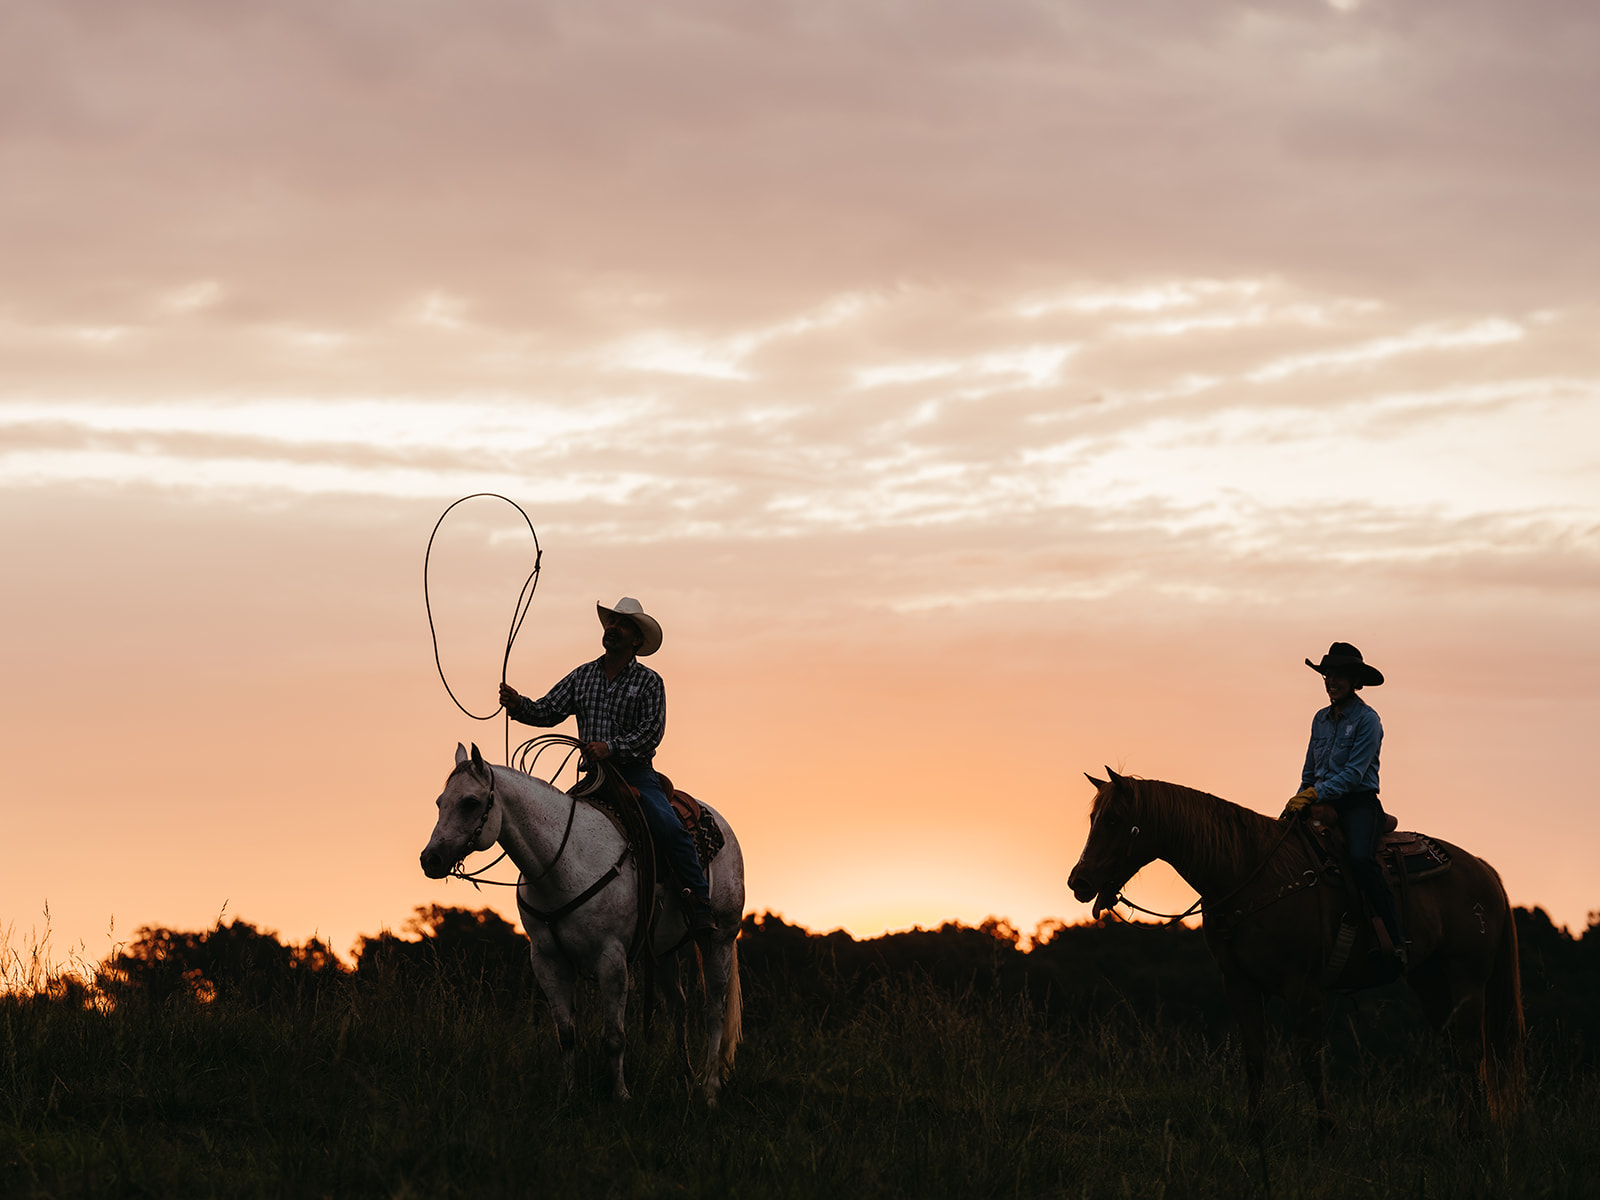 sunrise cattle work, cowboys in Missouri at the 808 ranch